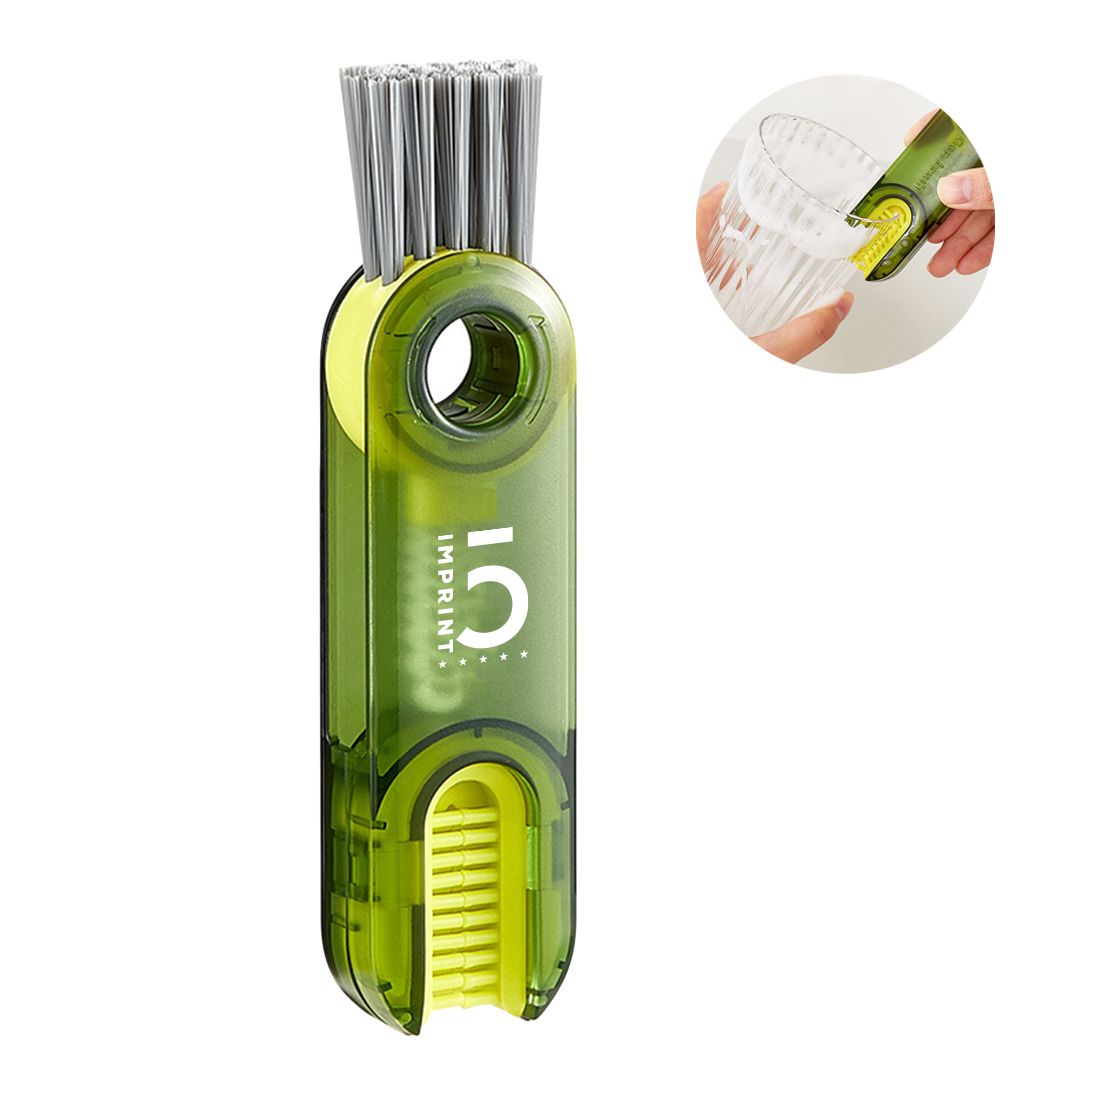 Custom 3-in-1 Rotating Cleaning Brush for Cup Lid